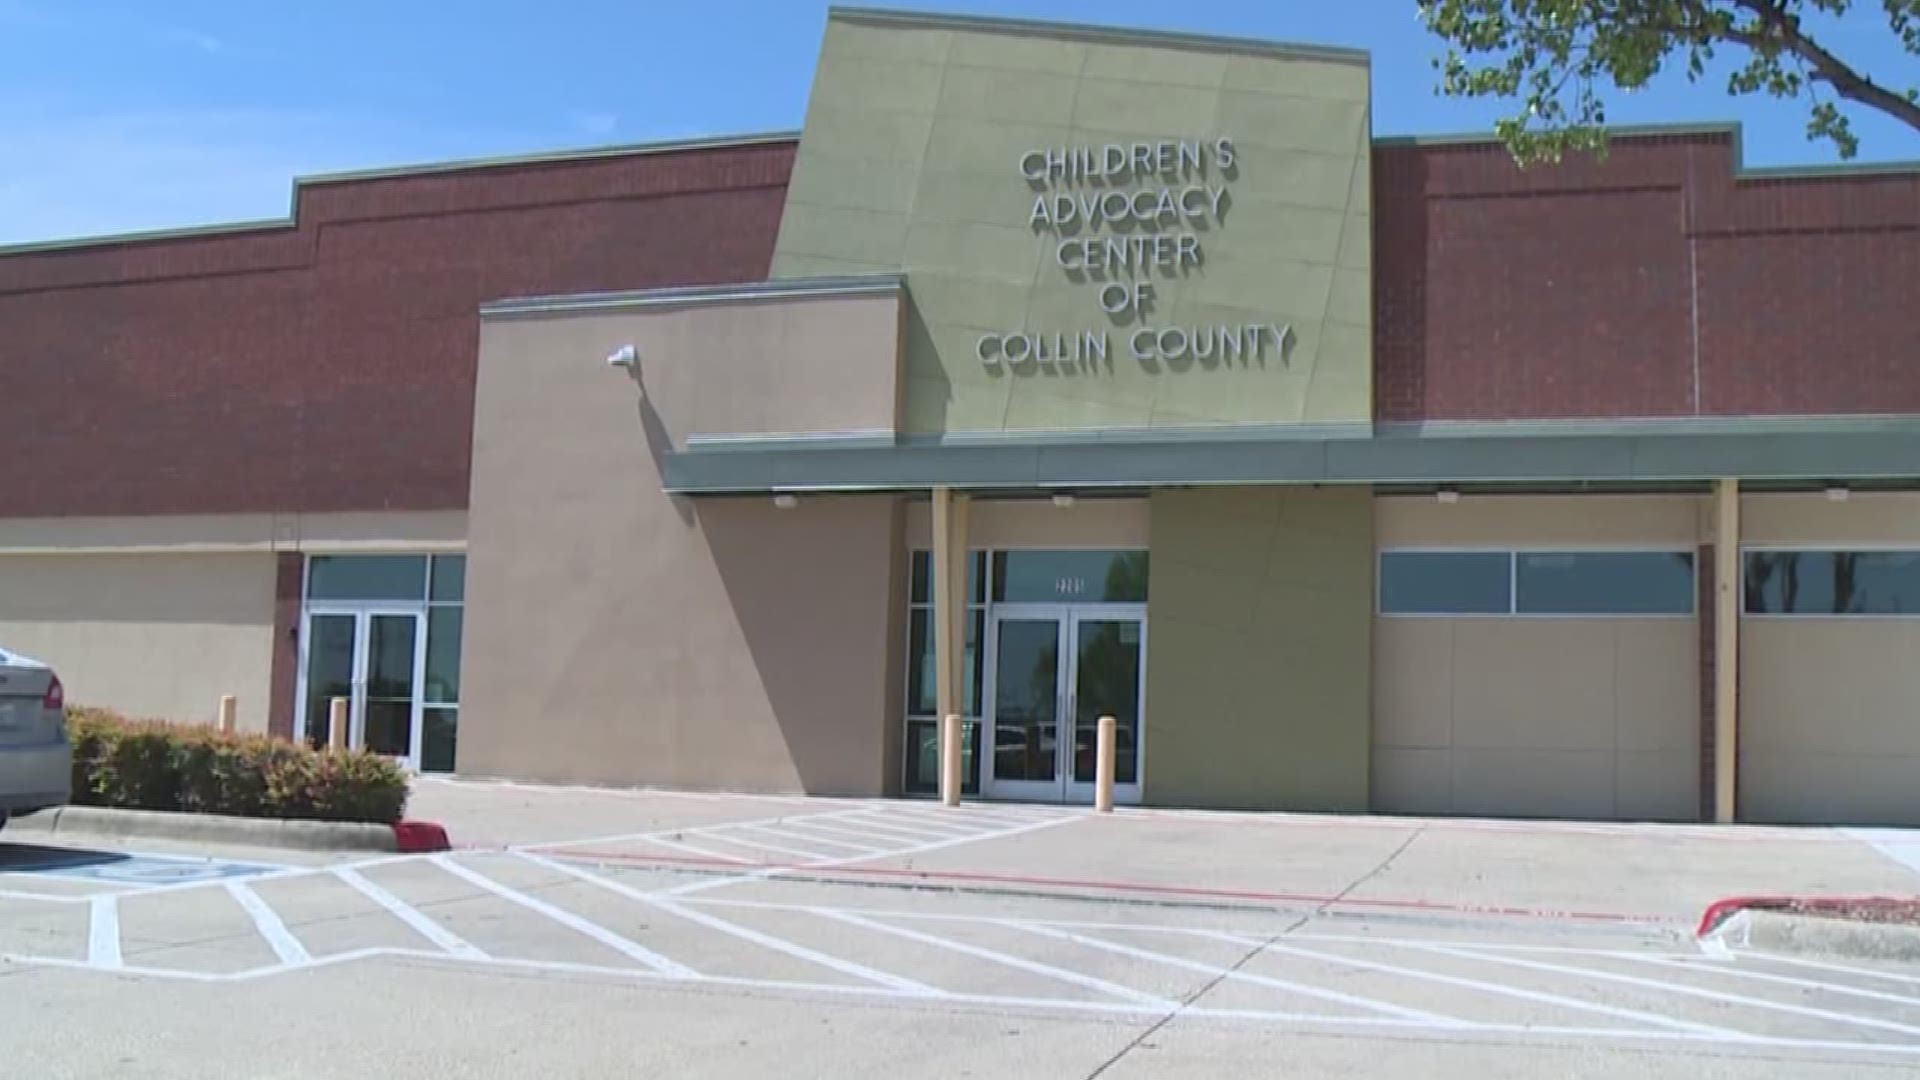 Children's advocacy center in Collin County is seeing huge increase in children it serves